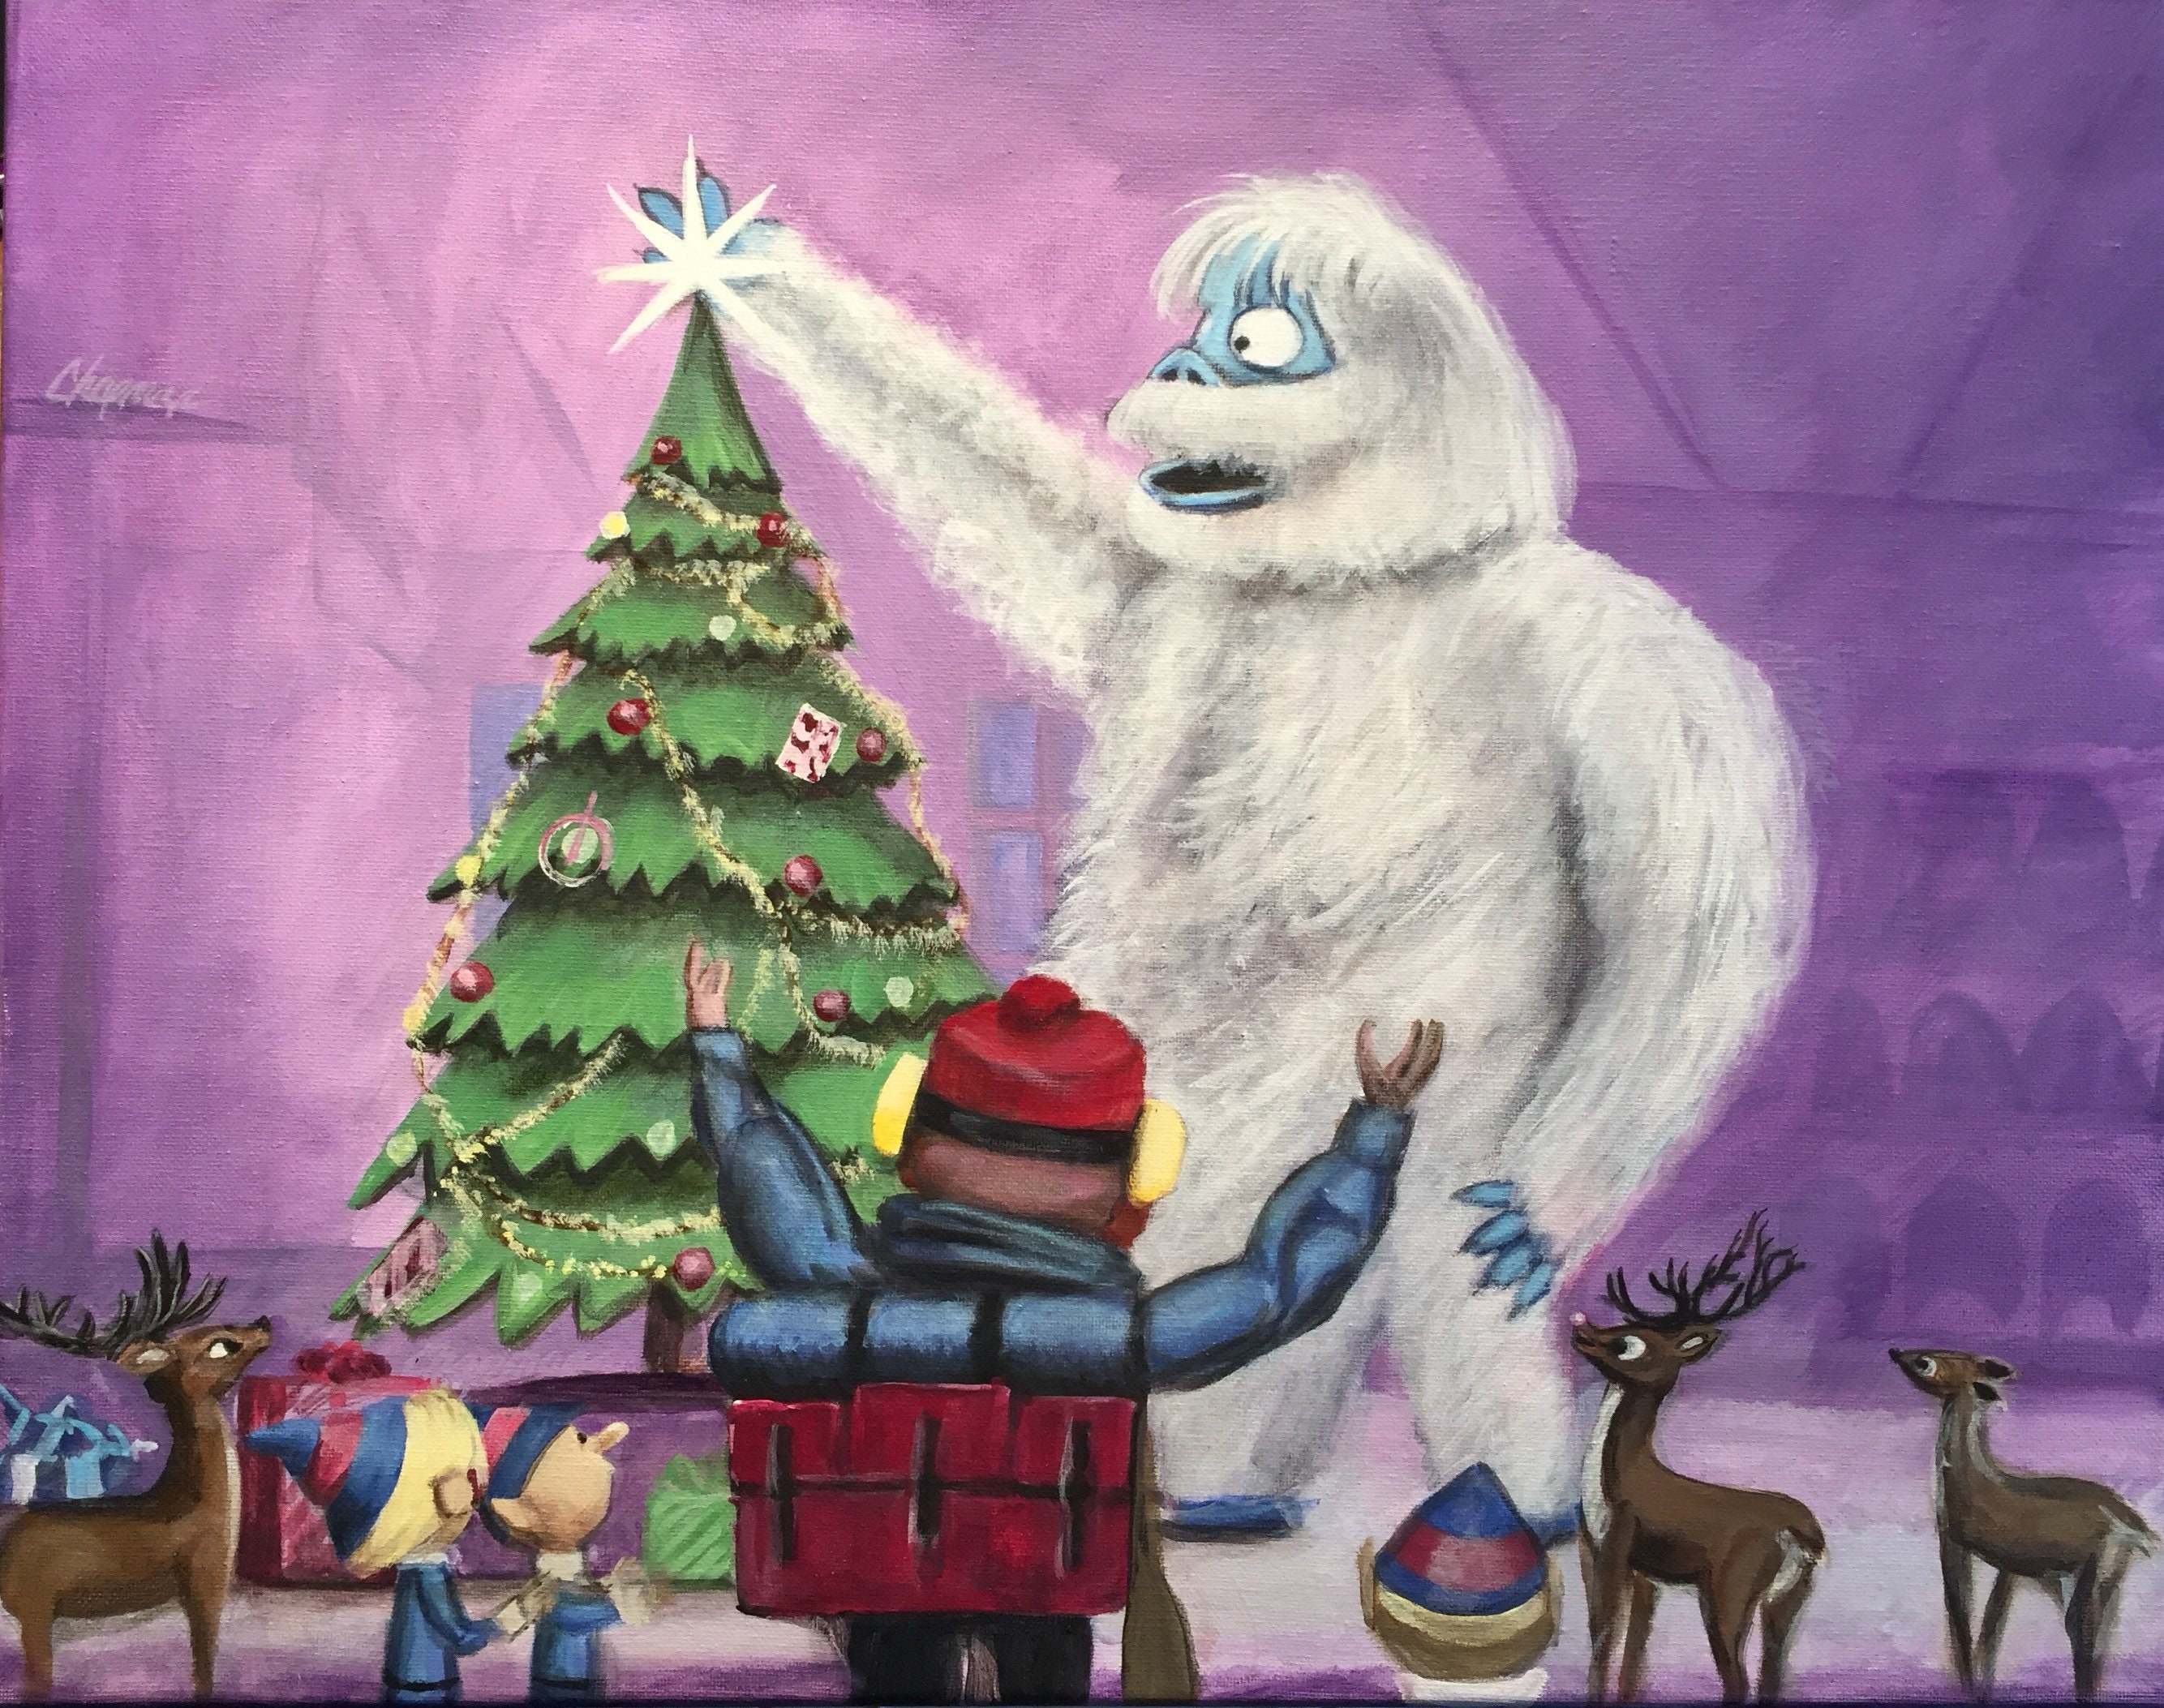 My attempt at abominable snowman tree